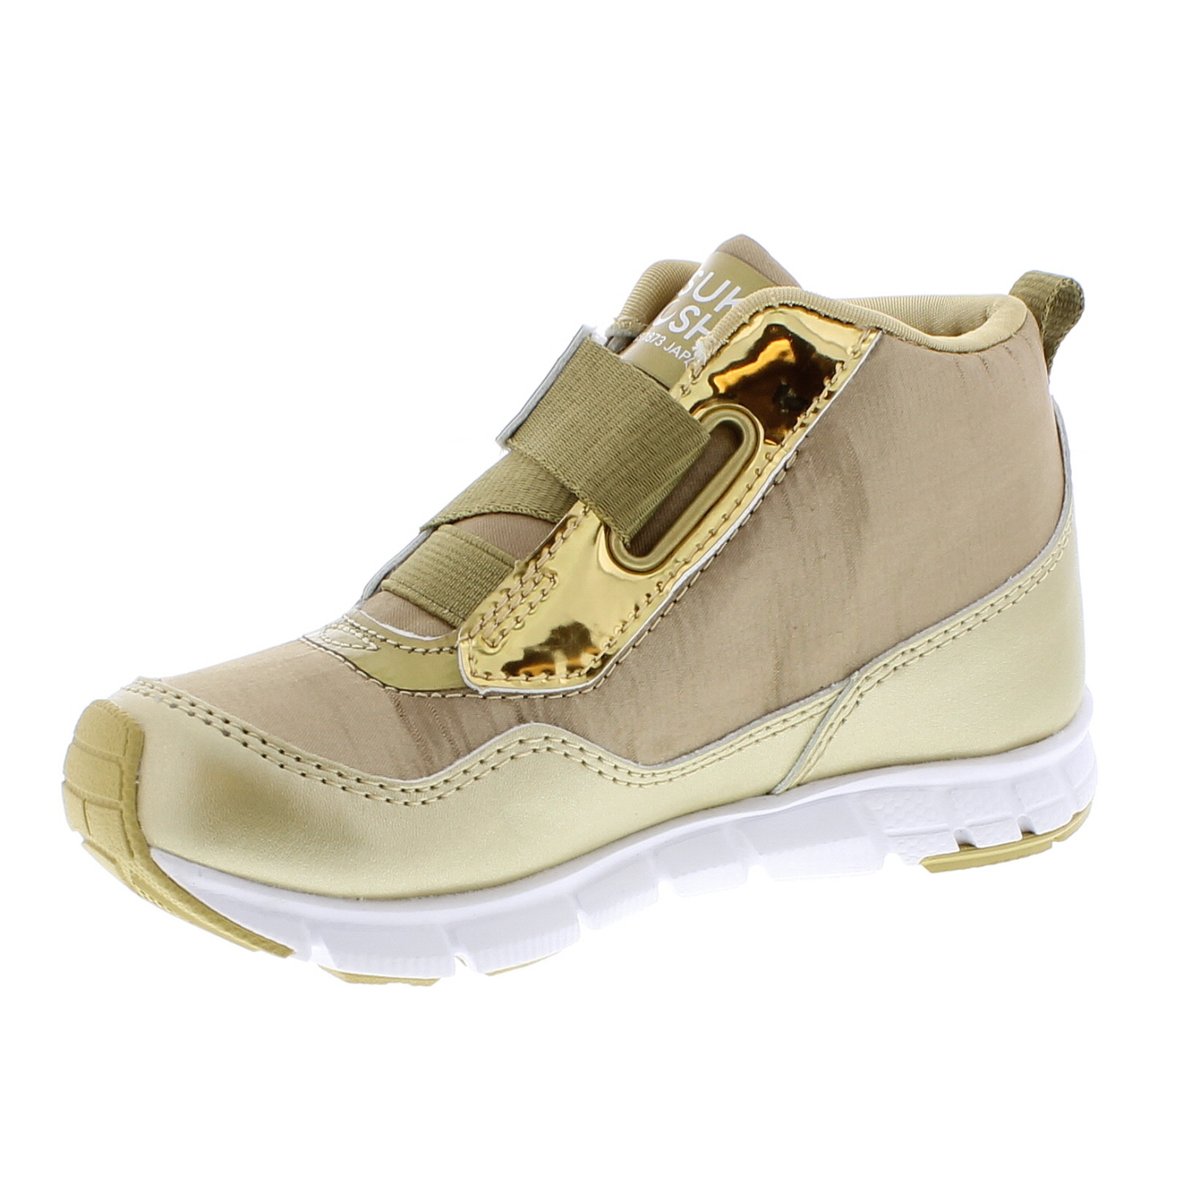 Child Tsukihoshi Tokyo Sneaker in Gold/Honey from the front view